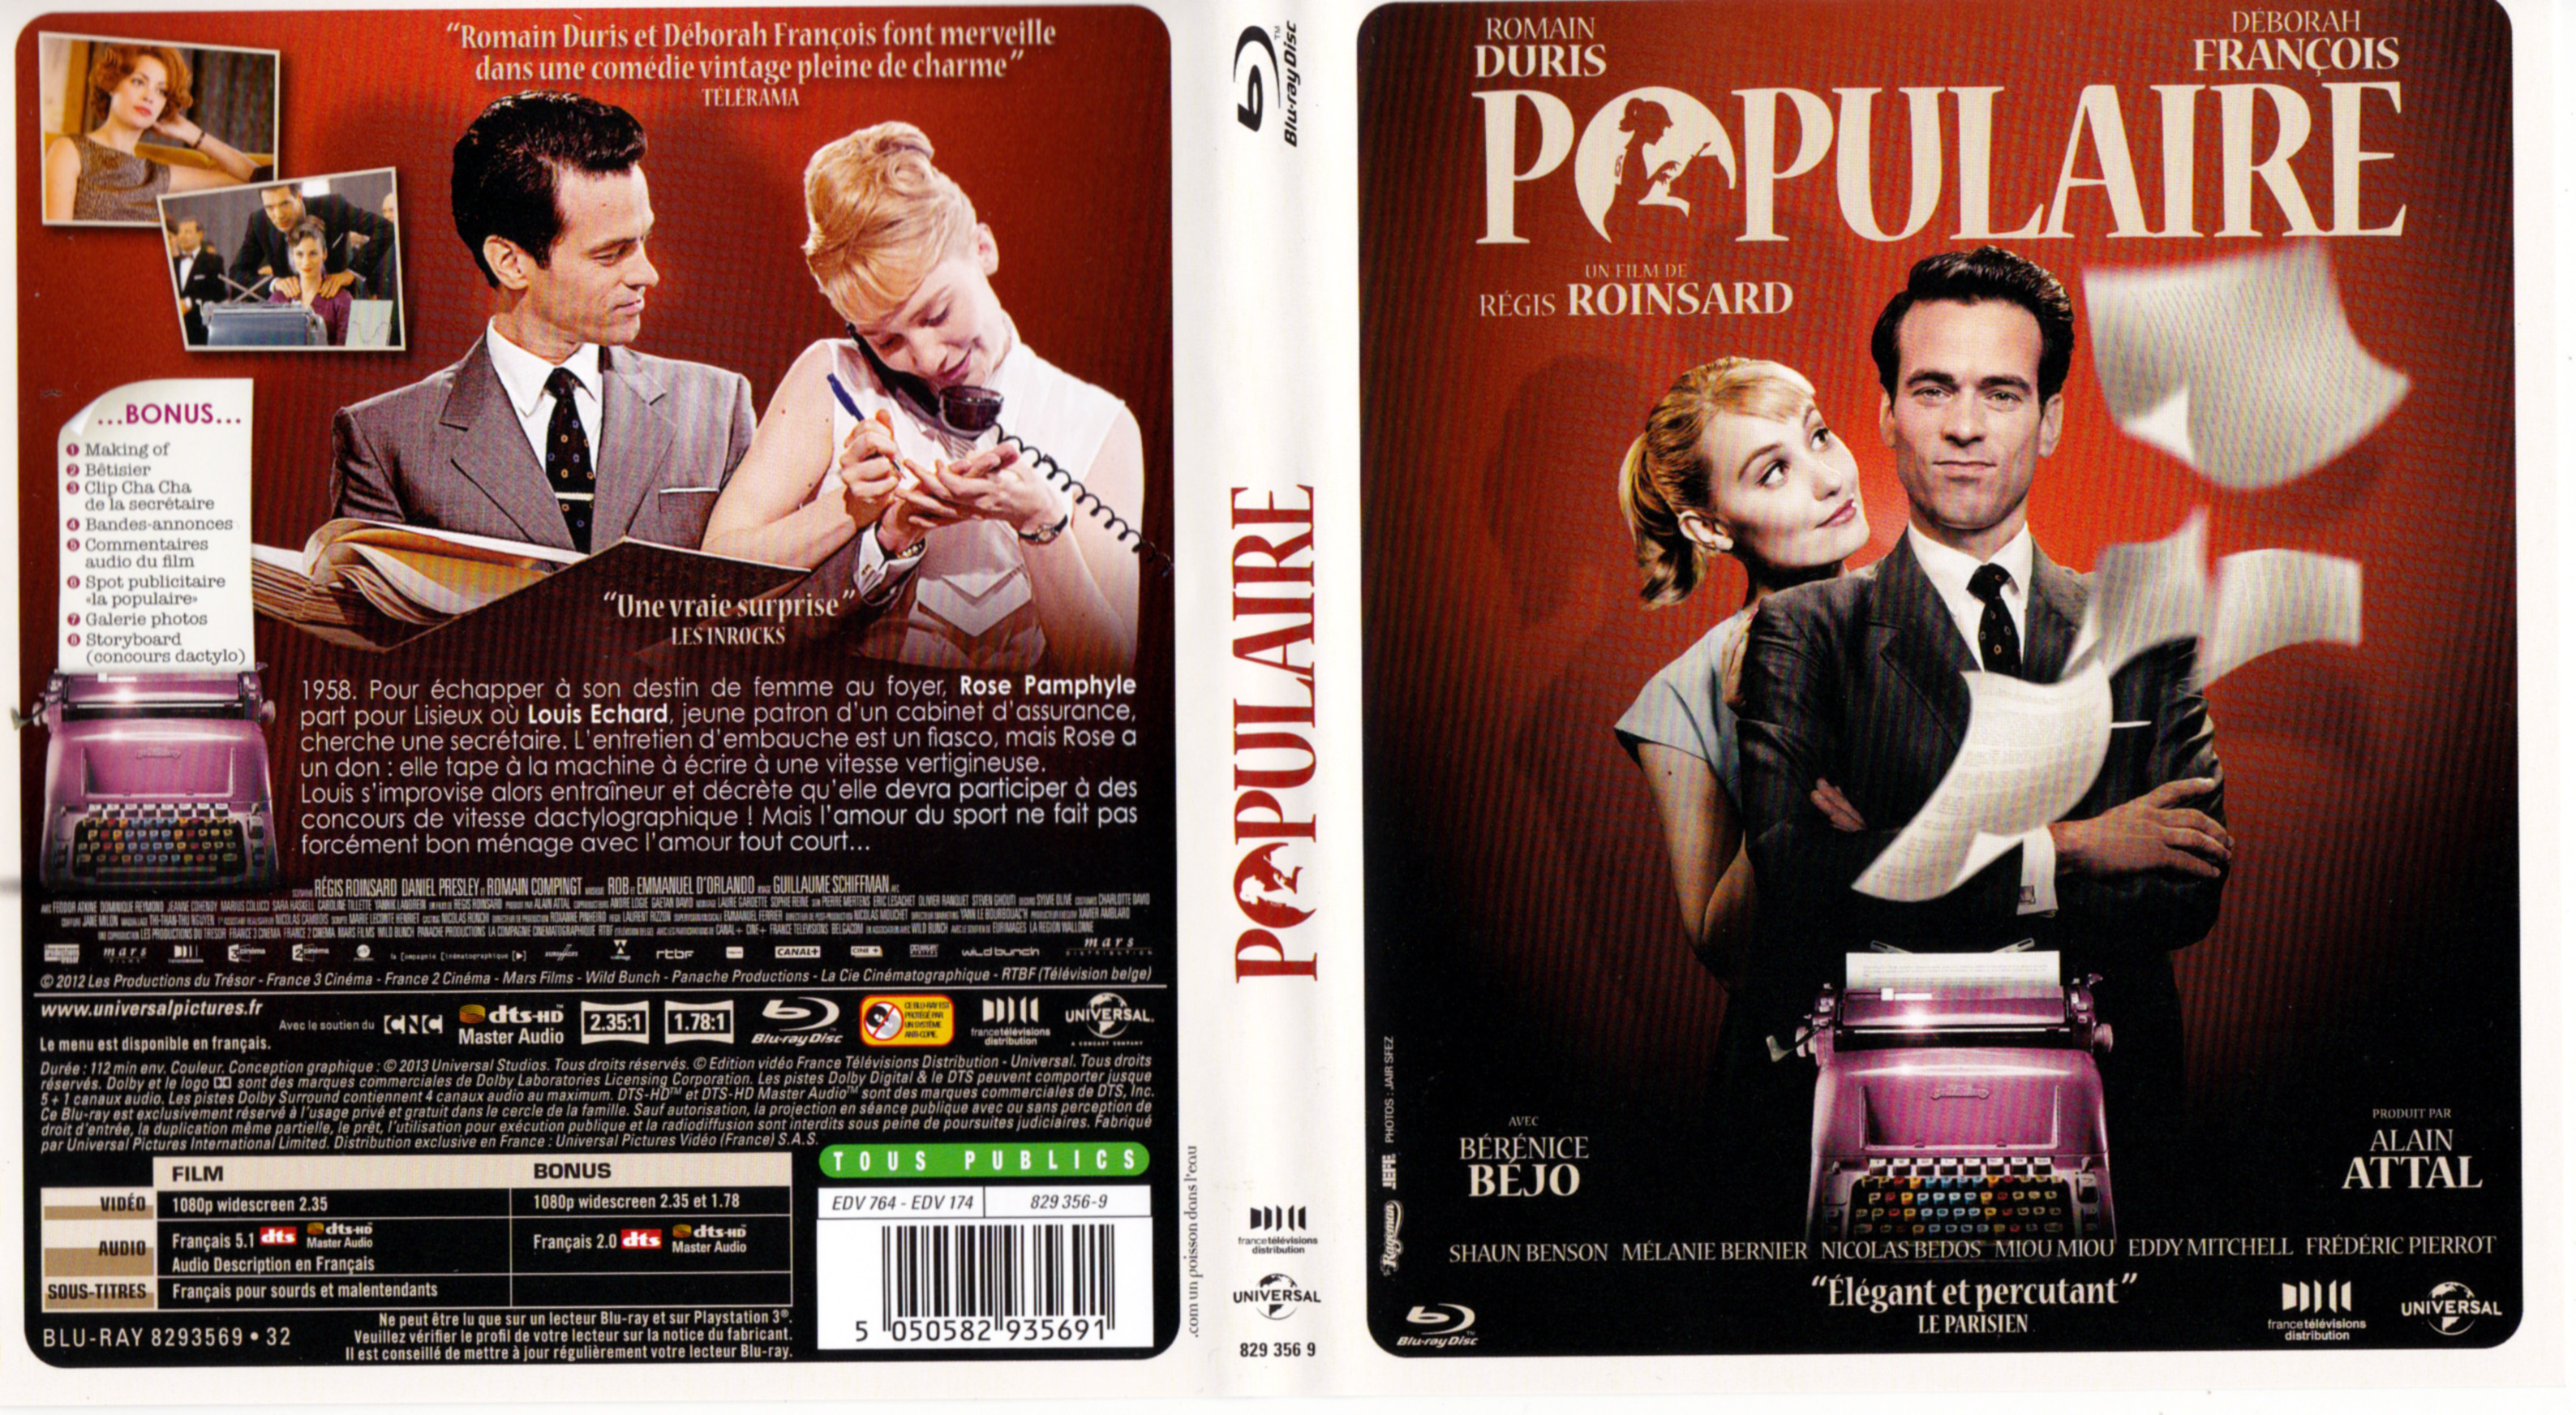 Jaquette DVD Populaire (BLU-RAY)